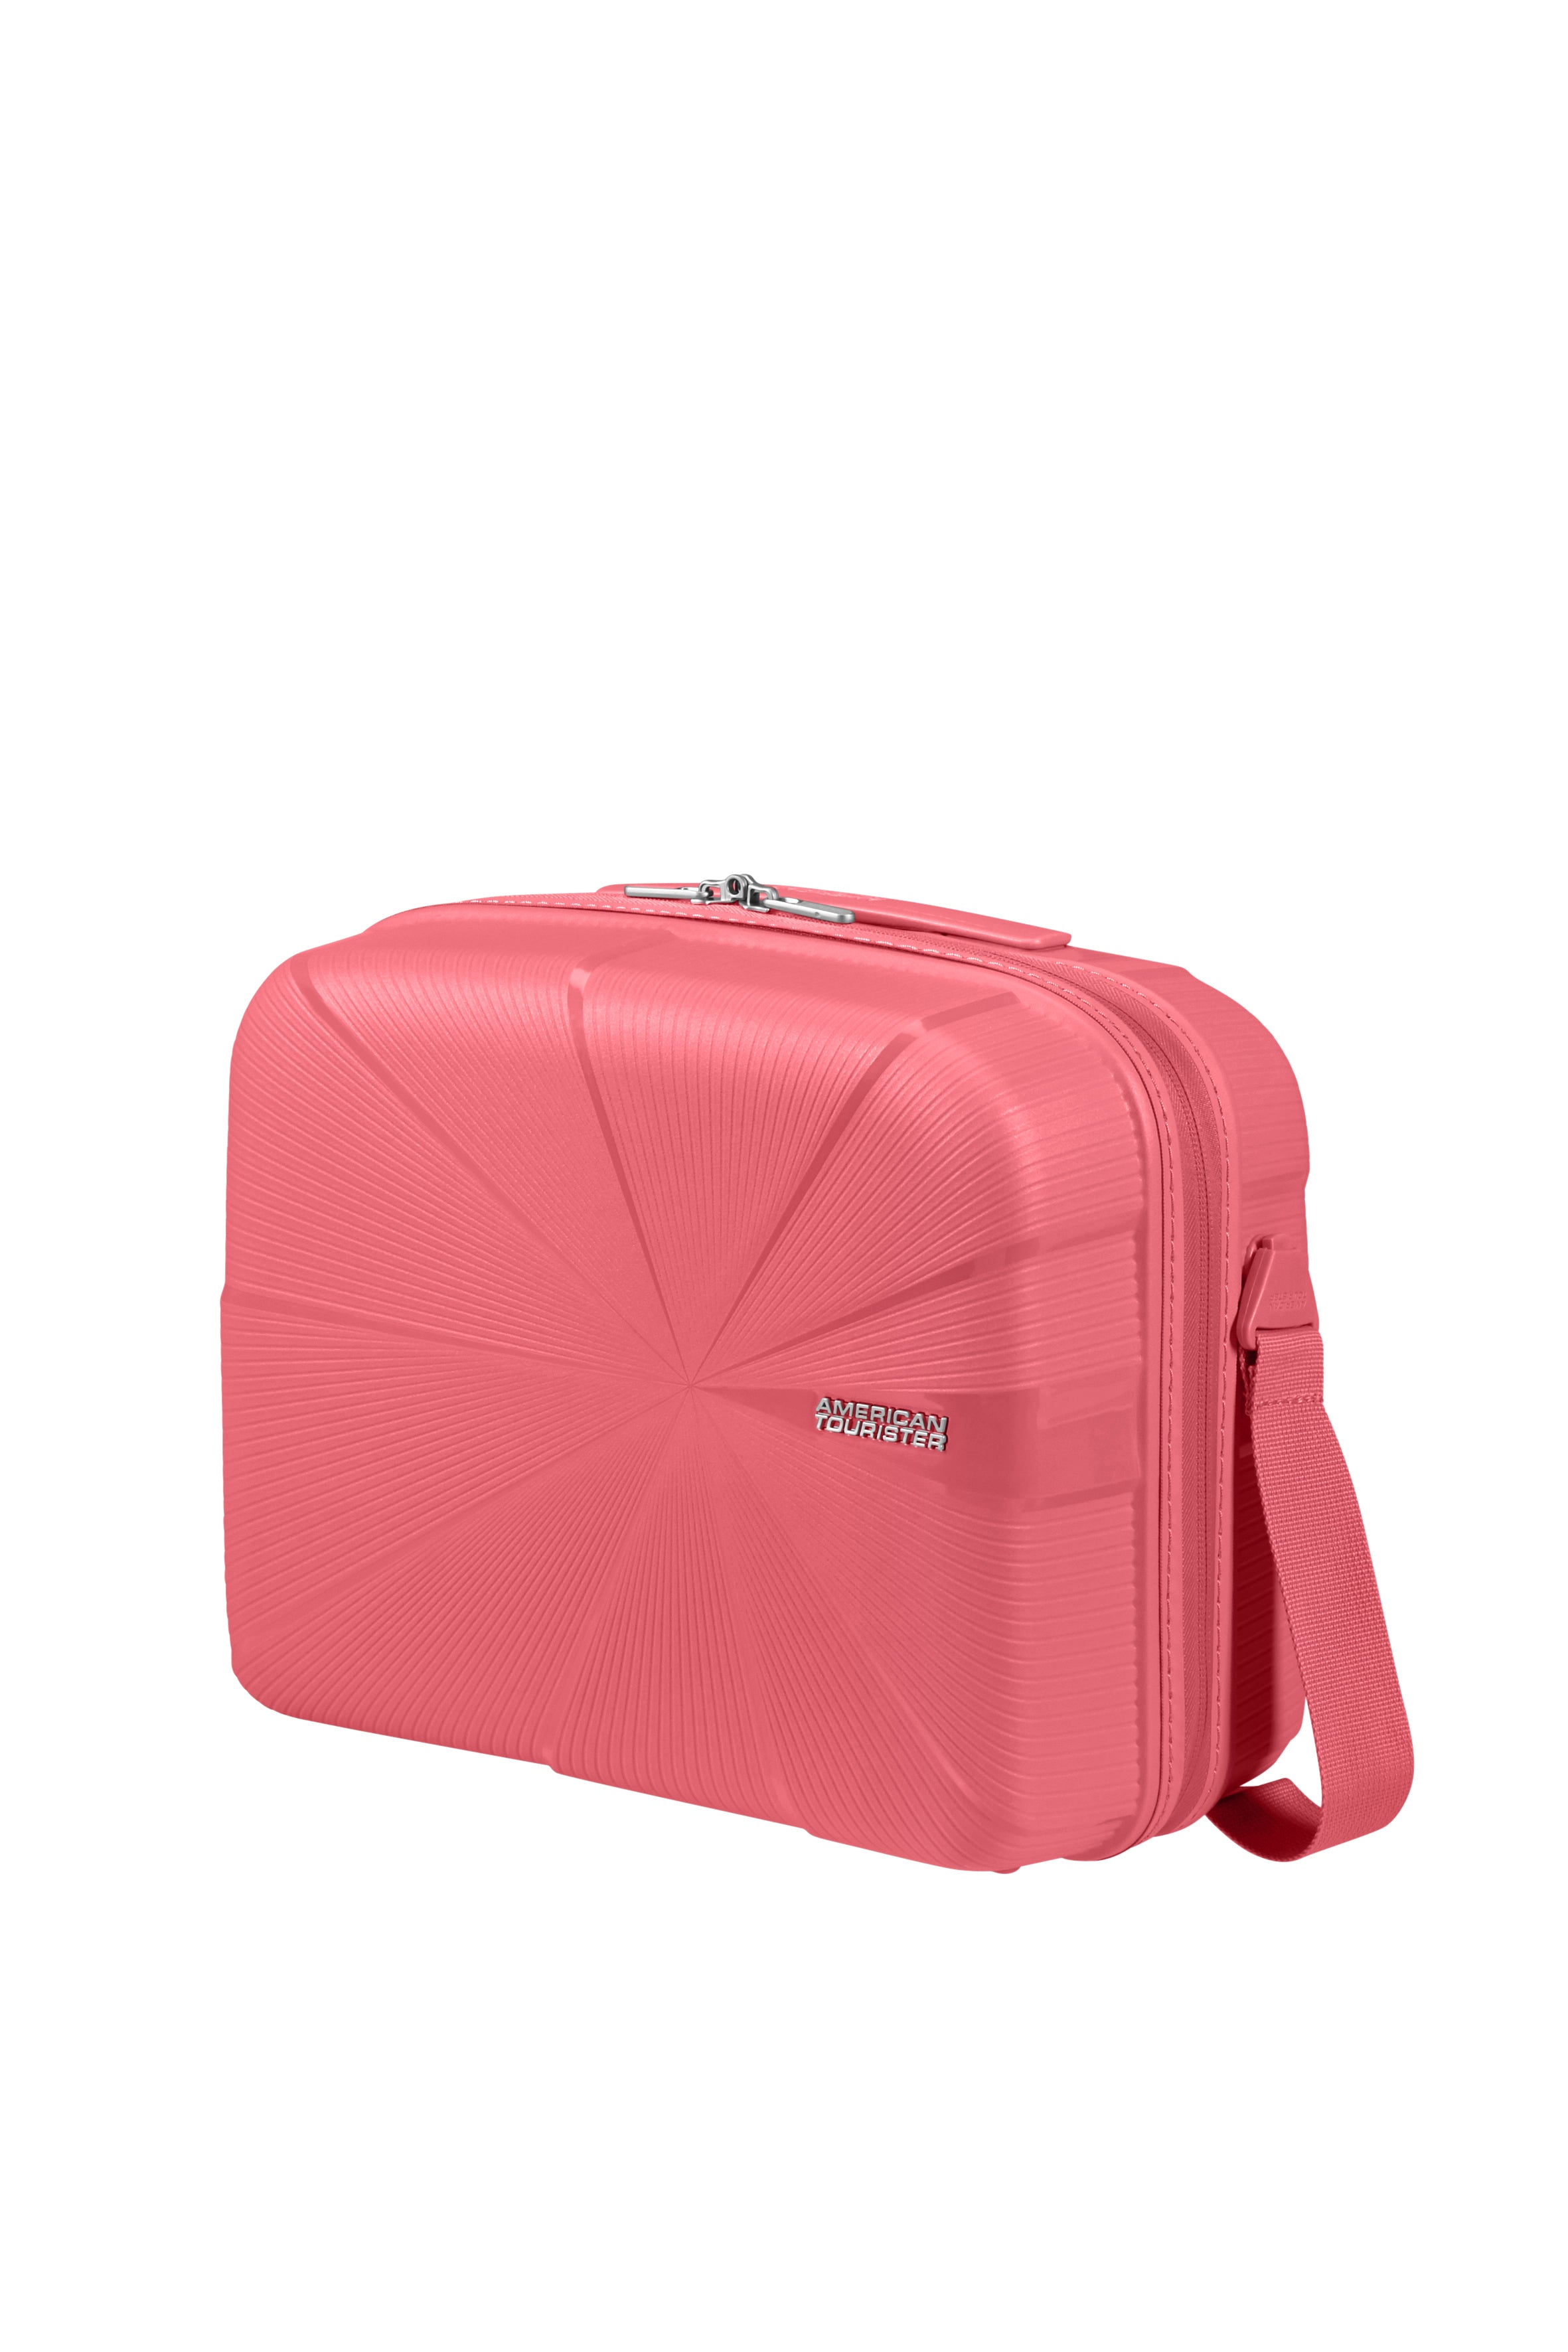 American Tourister - Star Vibe Beauty Case - Sun kissed Coral - 0